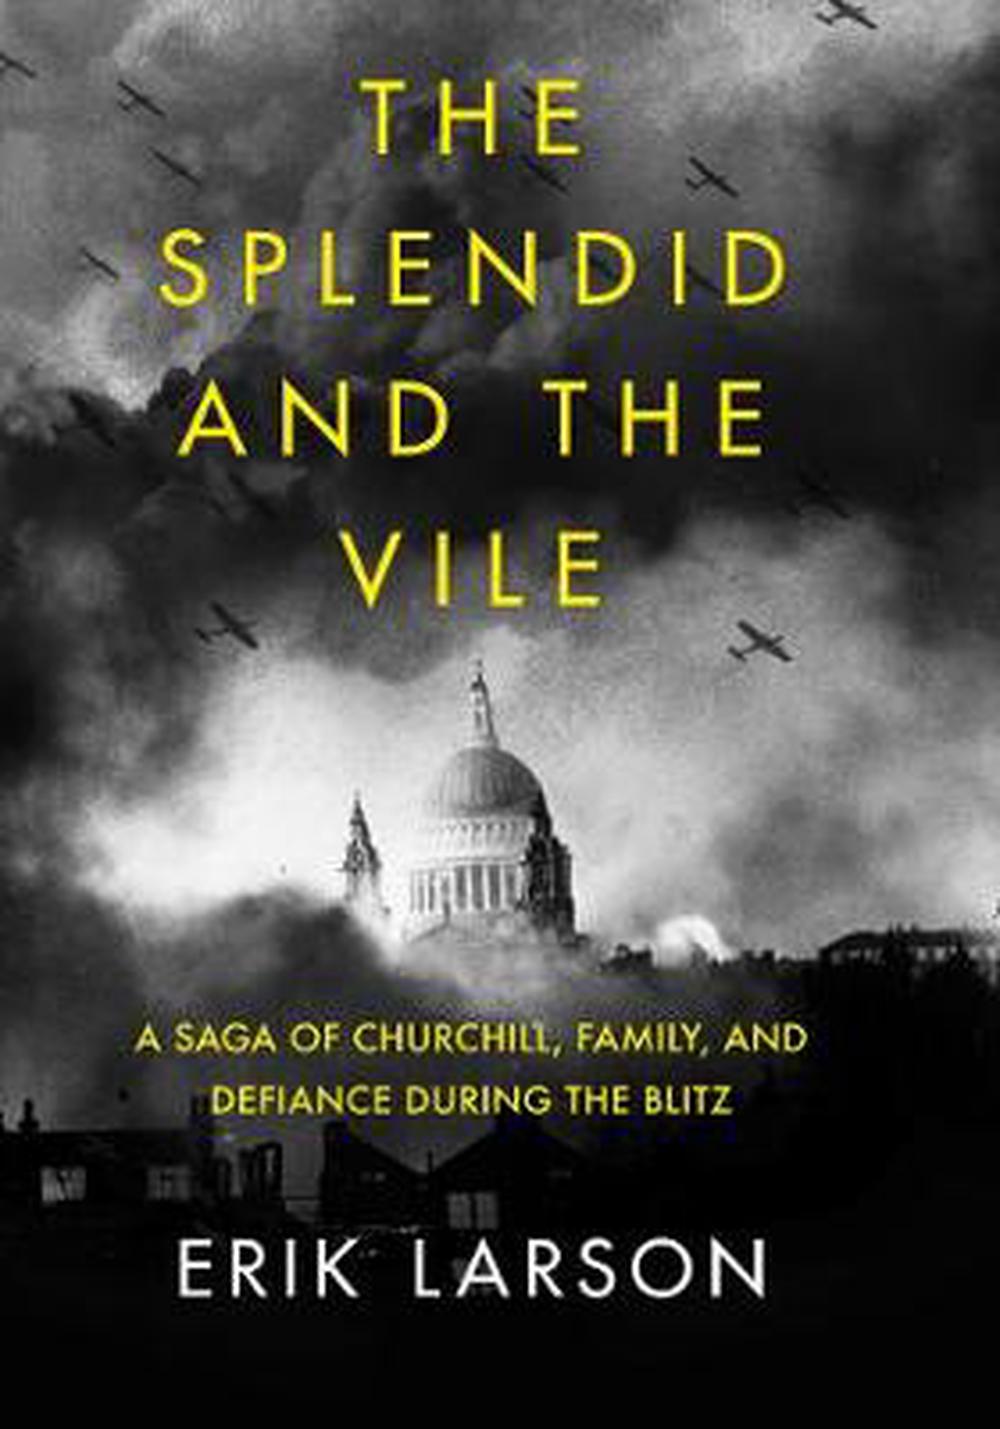 book the splendid and the vile